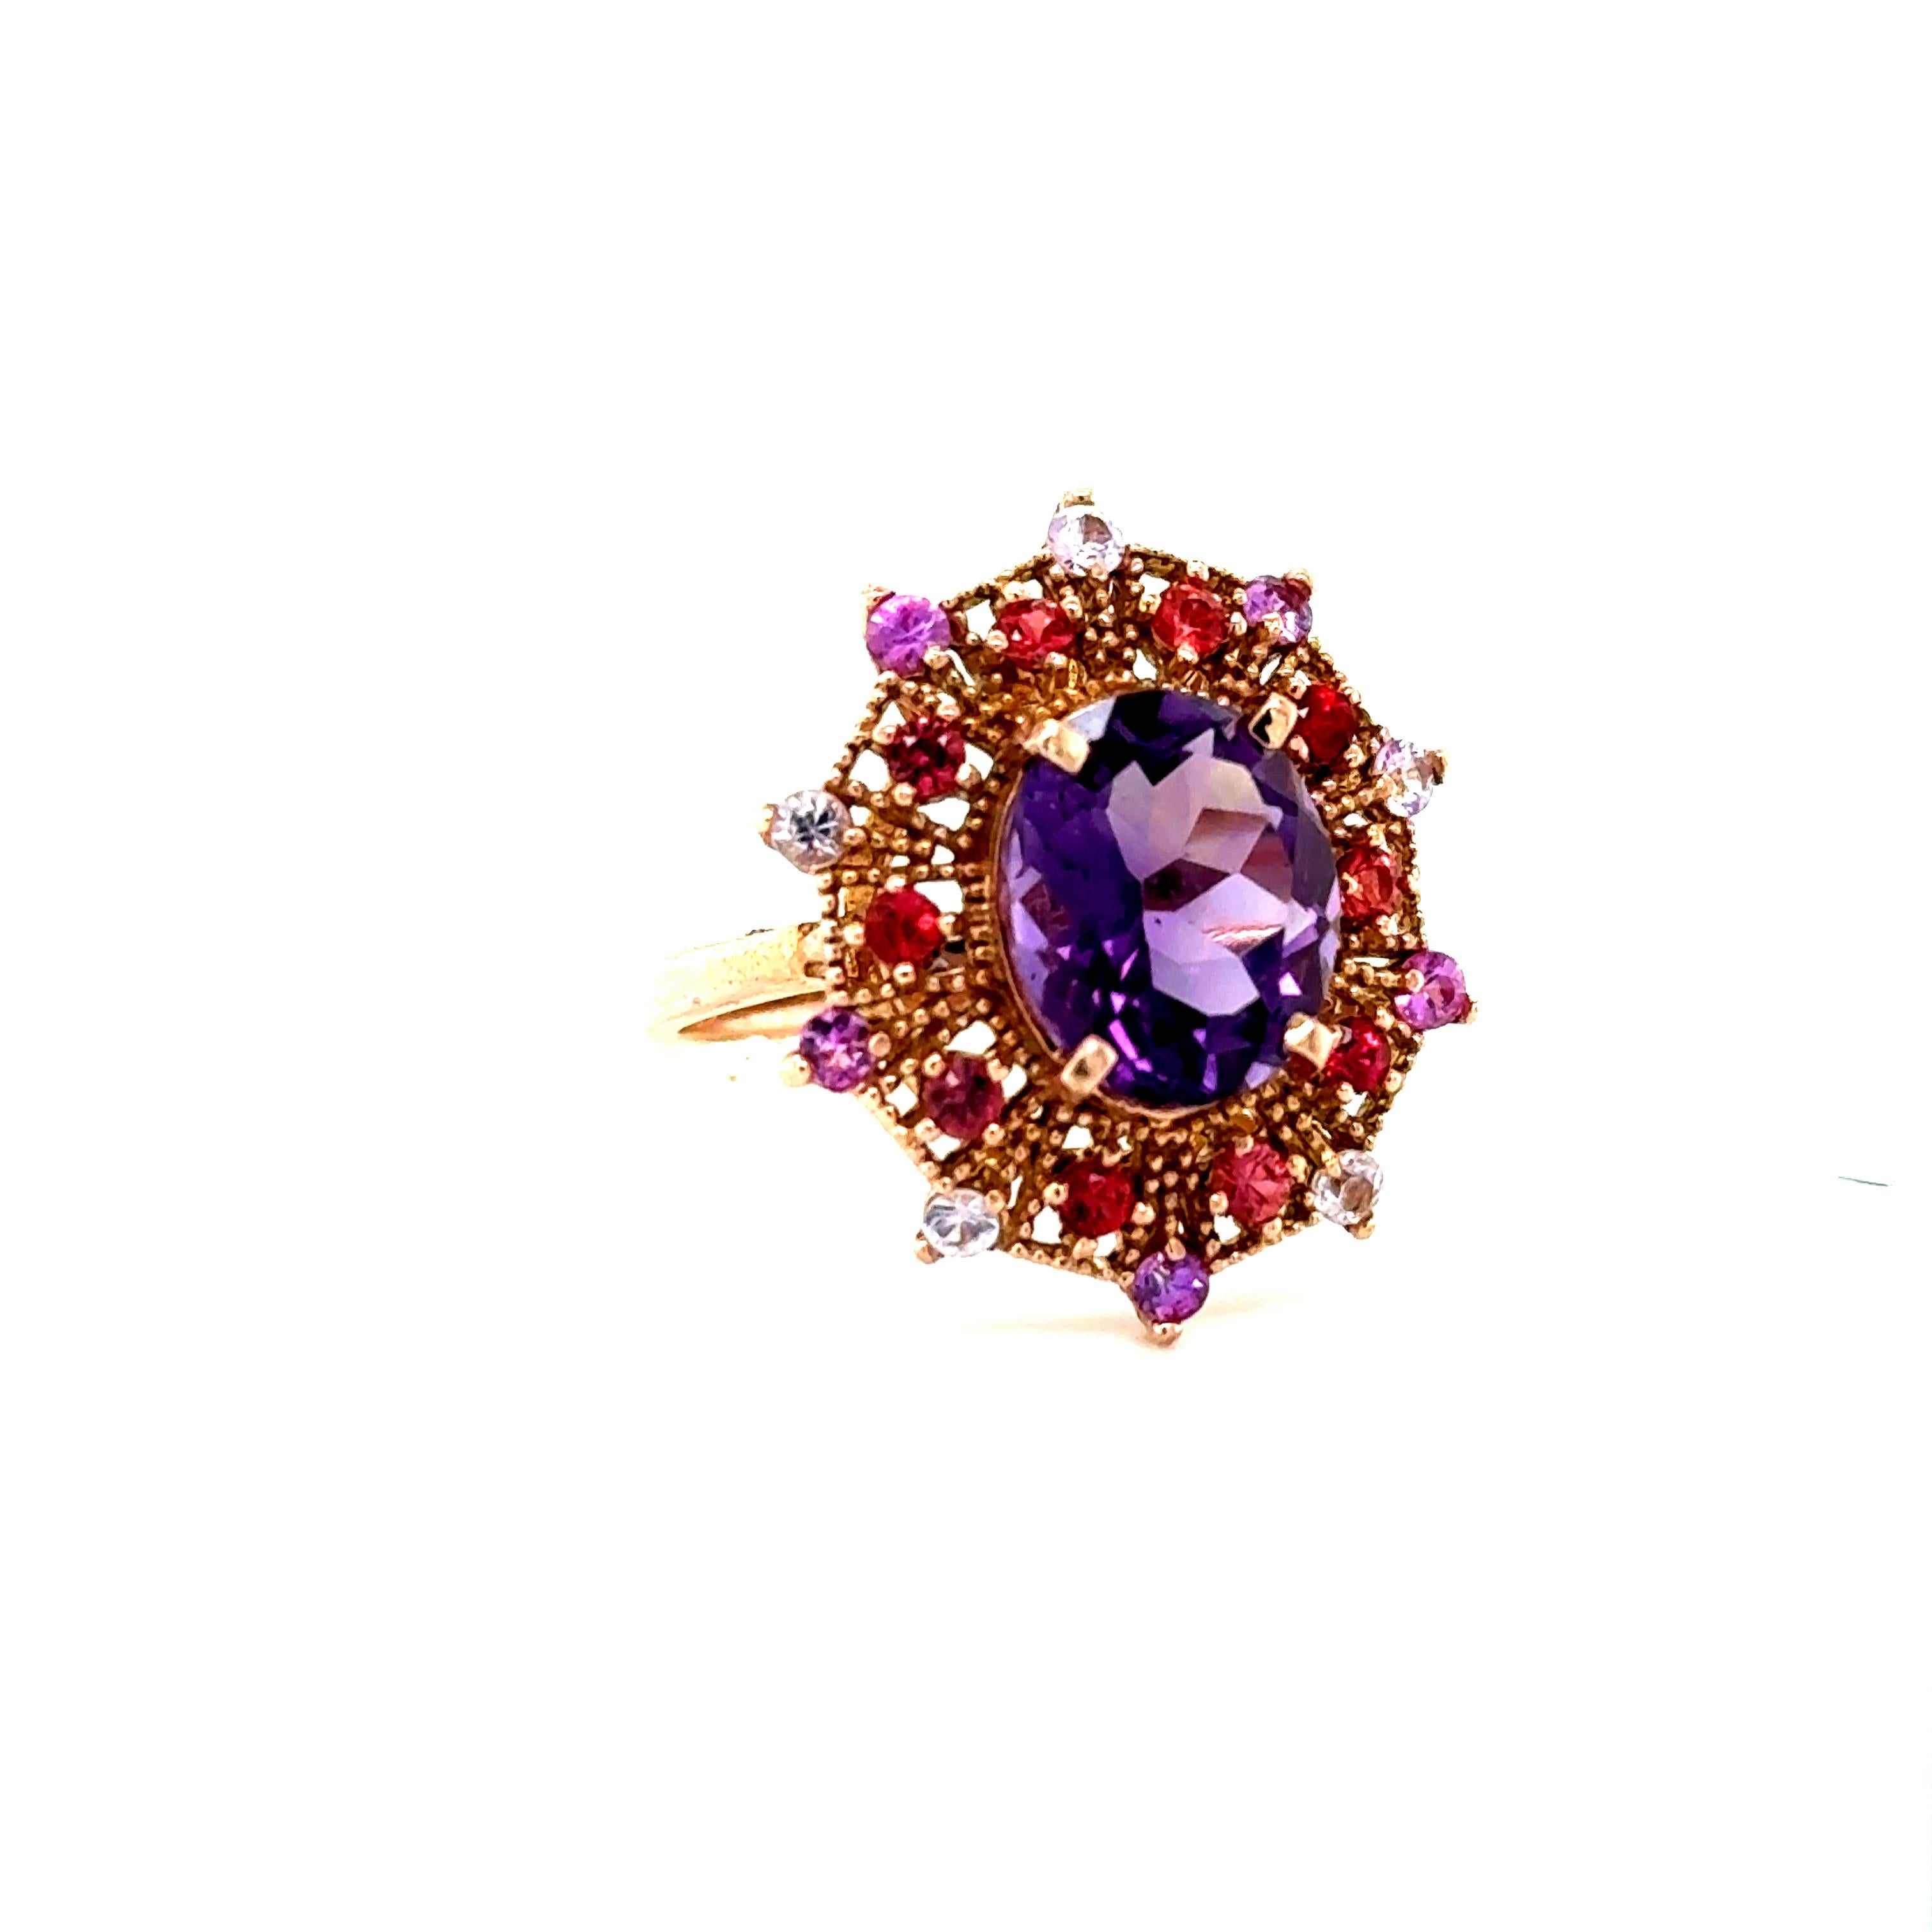 4.25 Carat Oval Cut Amethyst Sapphire Rose Gold Cocktail Ring

This beautiful vintage inspired setting with a modern colorful theme has an Oval Cut Amethyst weighing 3.33 carats and is surrounded by 20 Round Cut Multi-Colored Sapphires that weigh